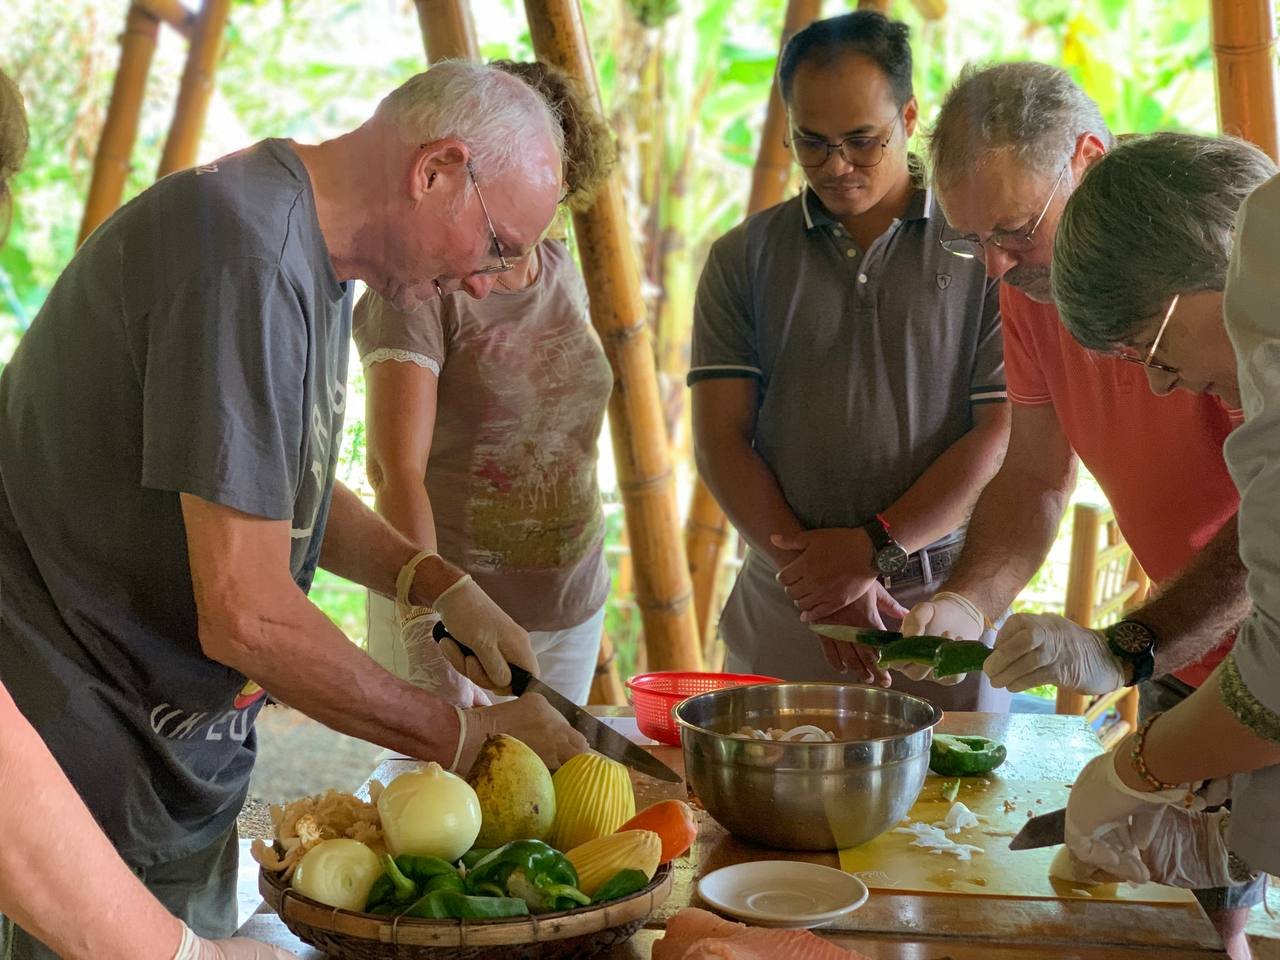 khmer cooking lessons at hanchey bamboo resort (7).jpg